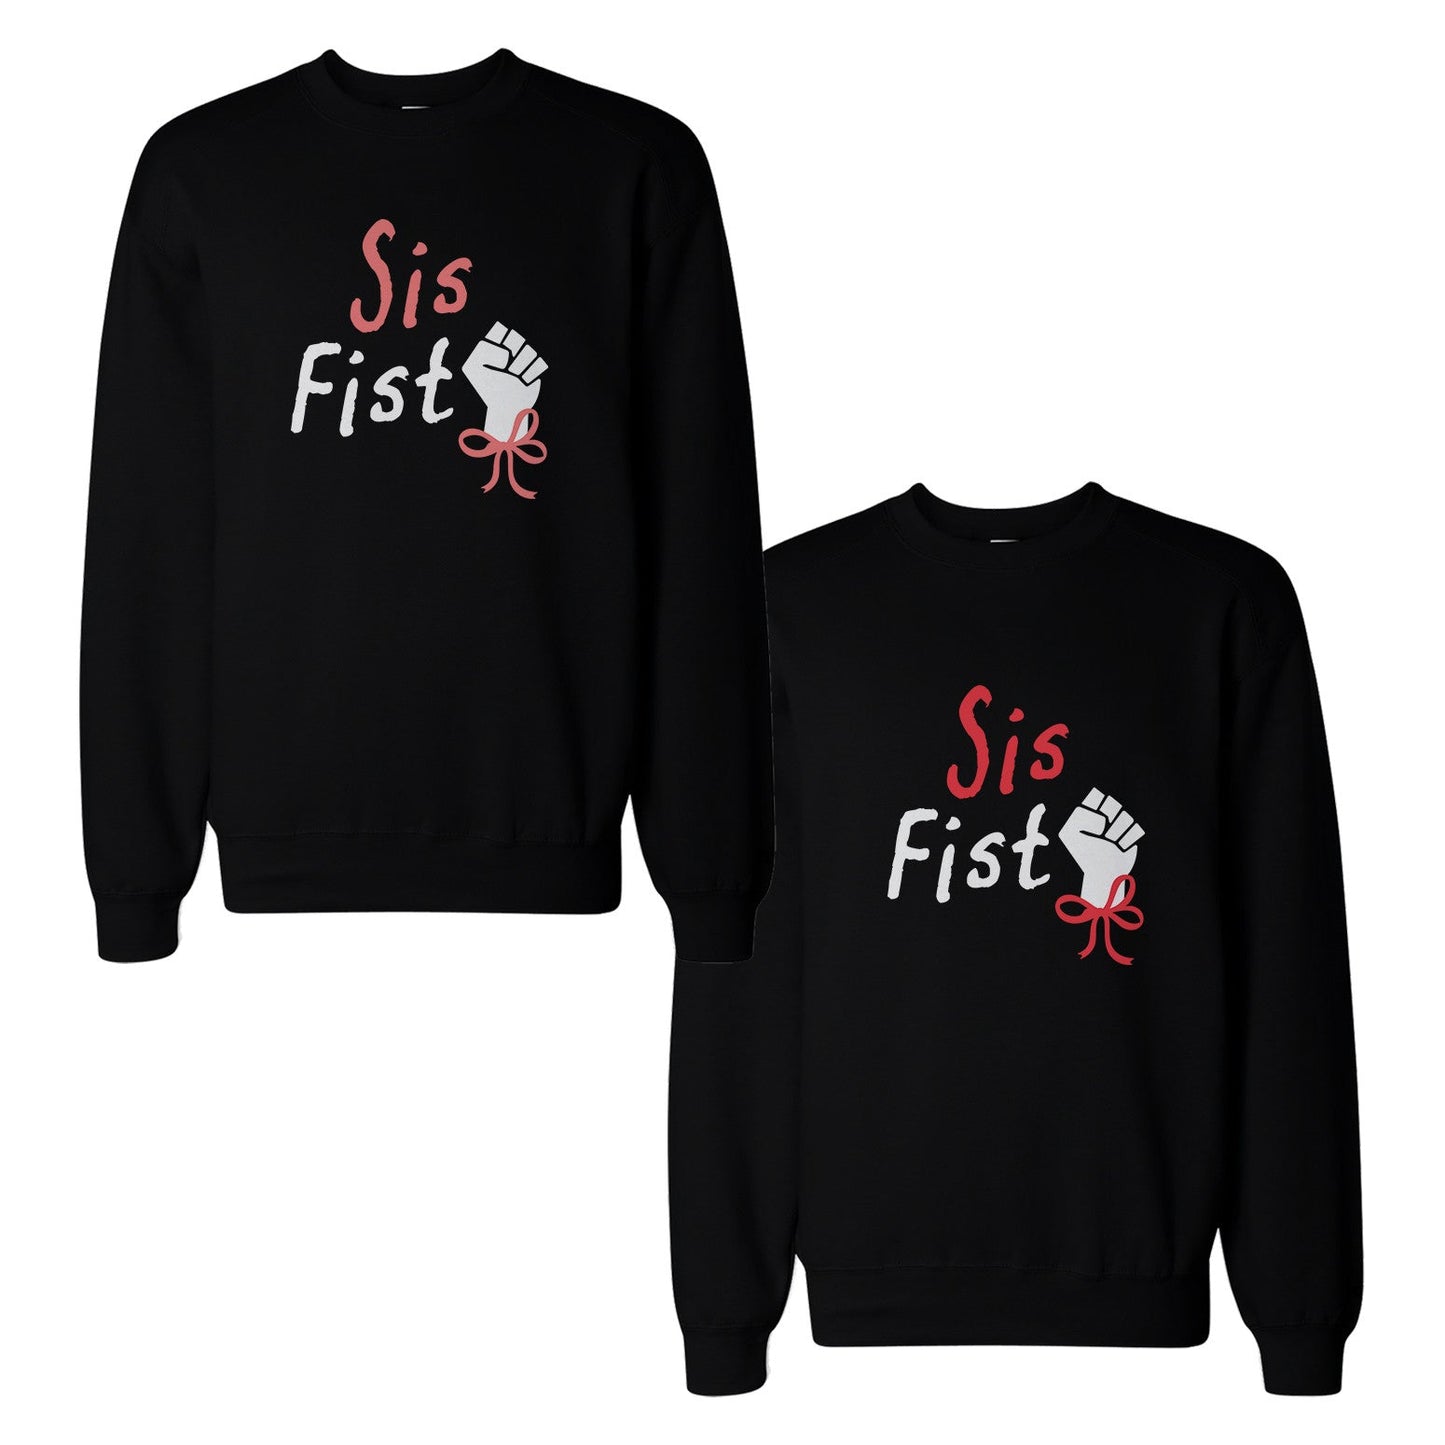 Sis Fist Bff Matching Sweatshirts Best Friend Gift For Holidays - 365 In Love